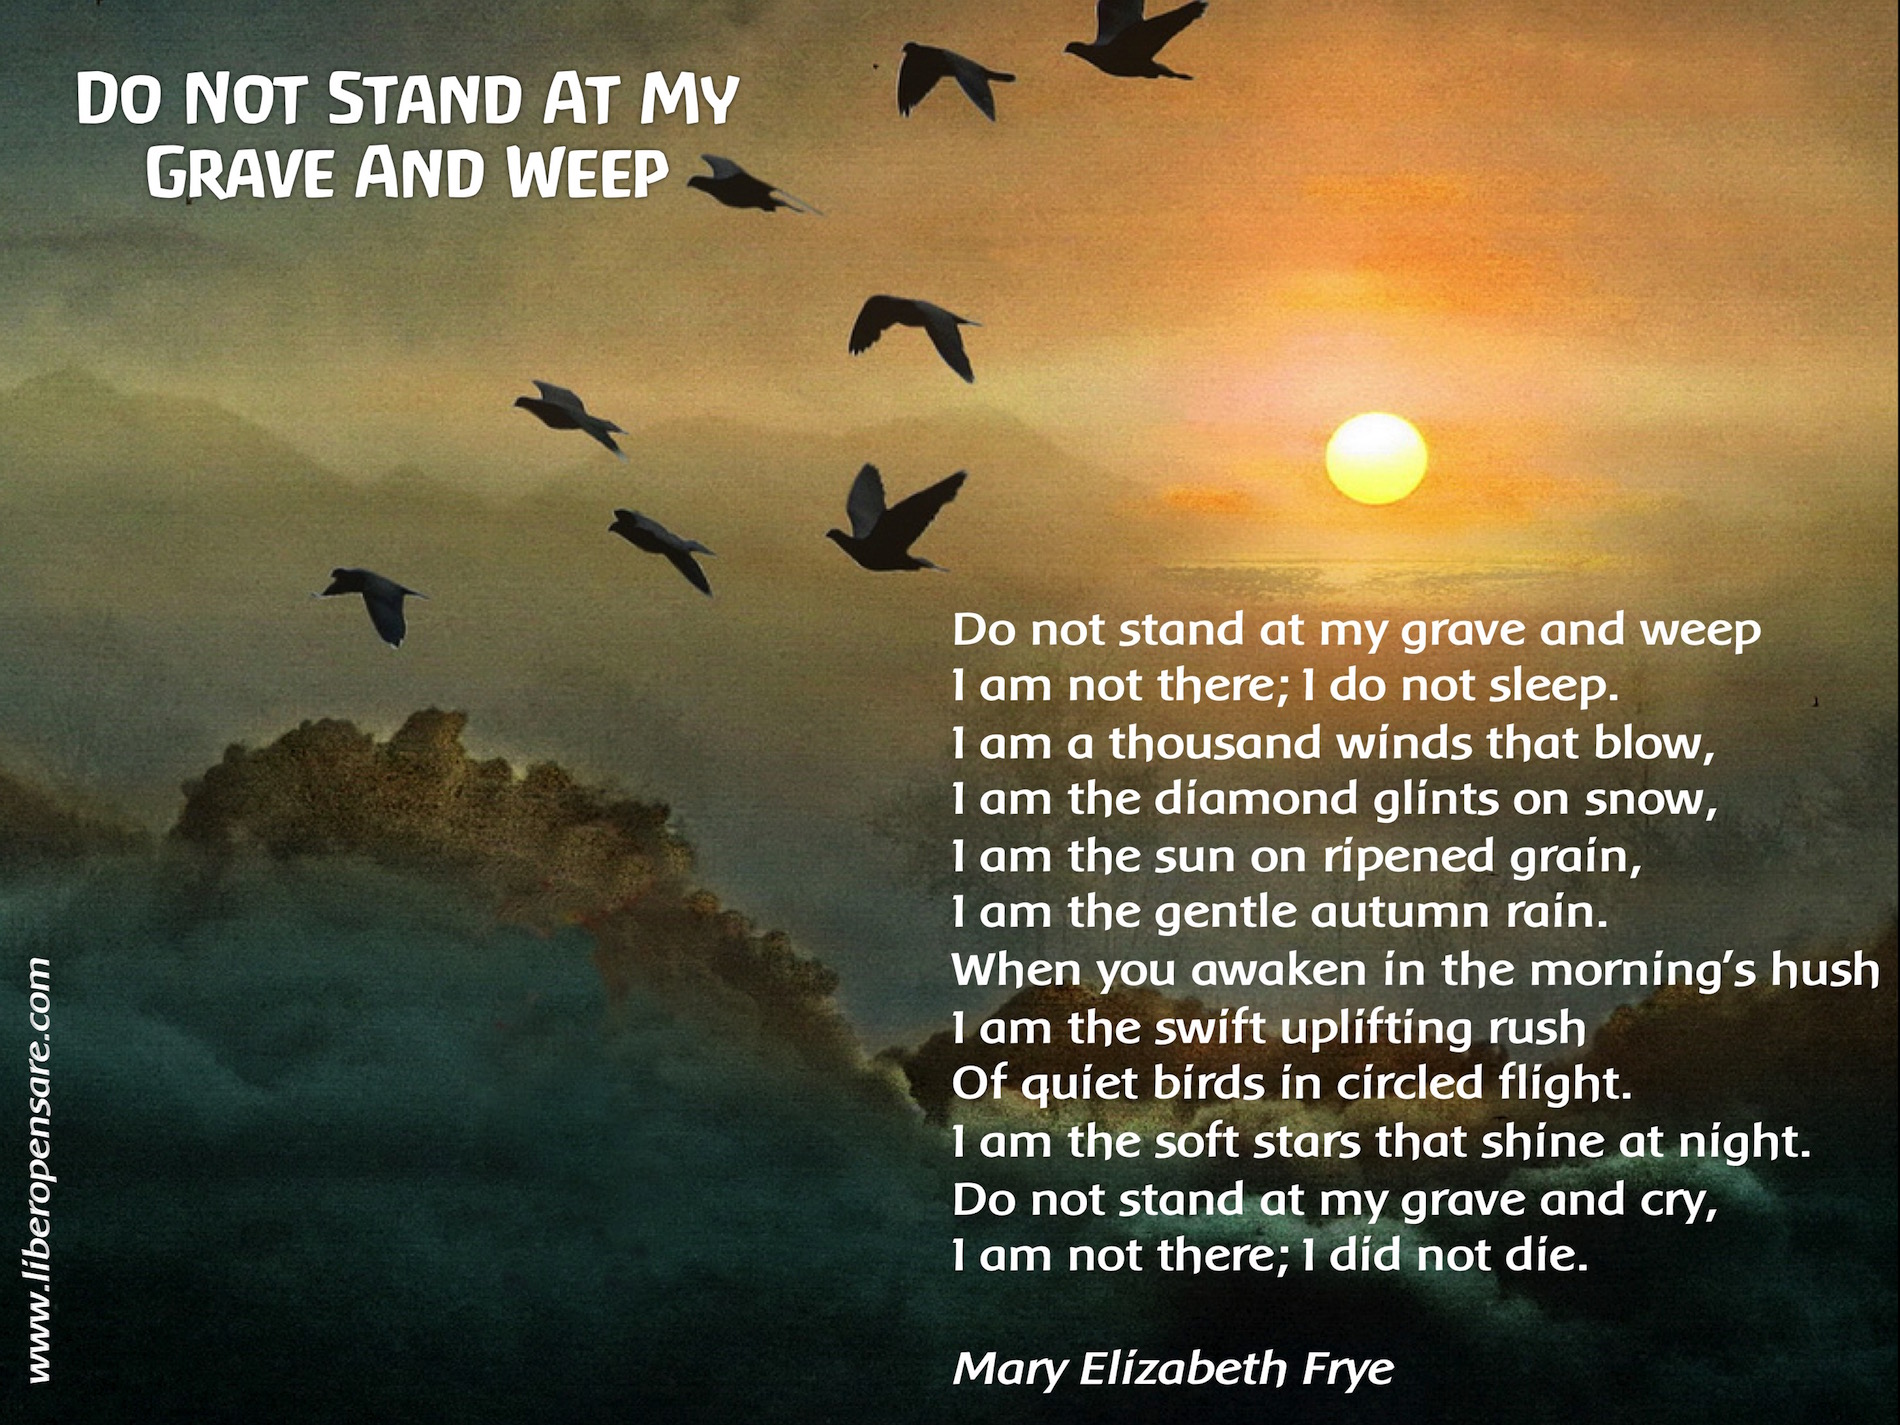 Do not stand at my grave and weep Mary Elizabeth Fryejpg